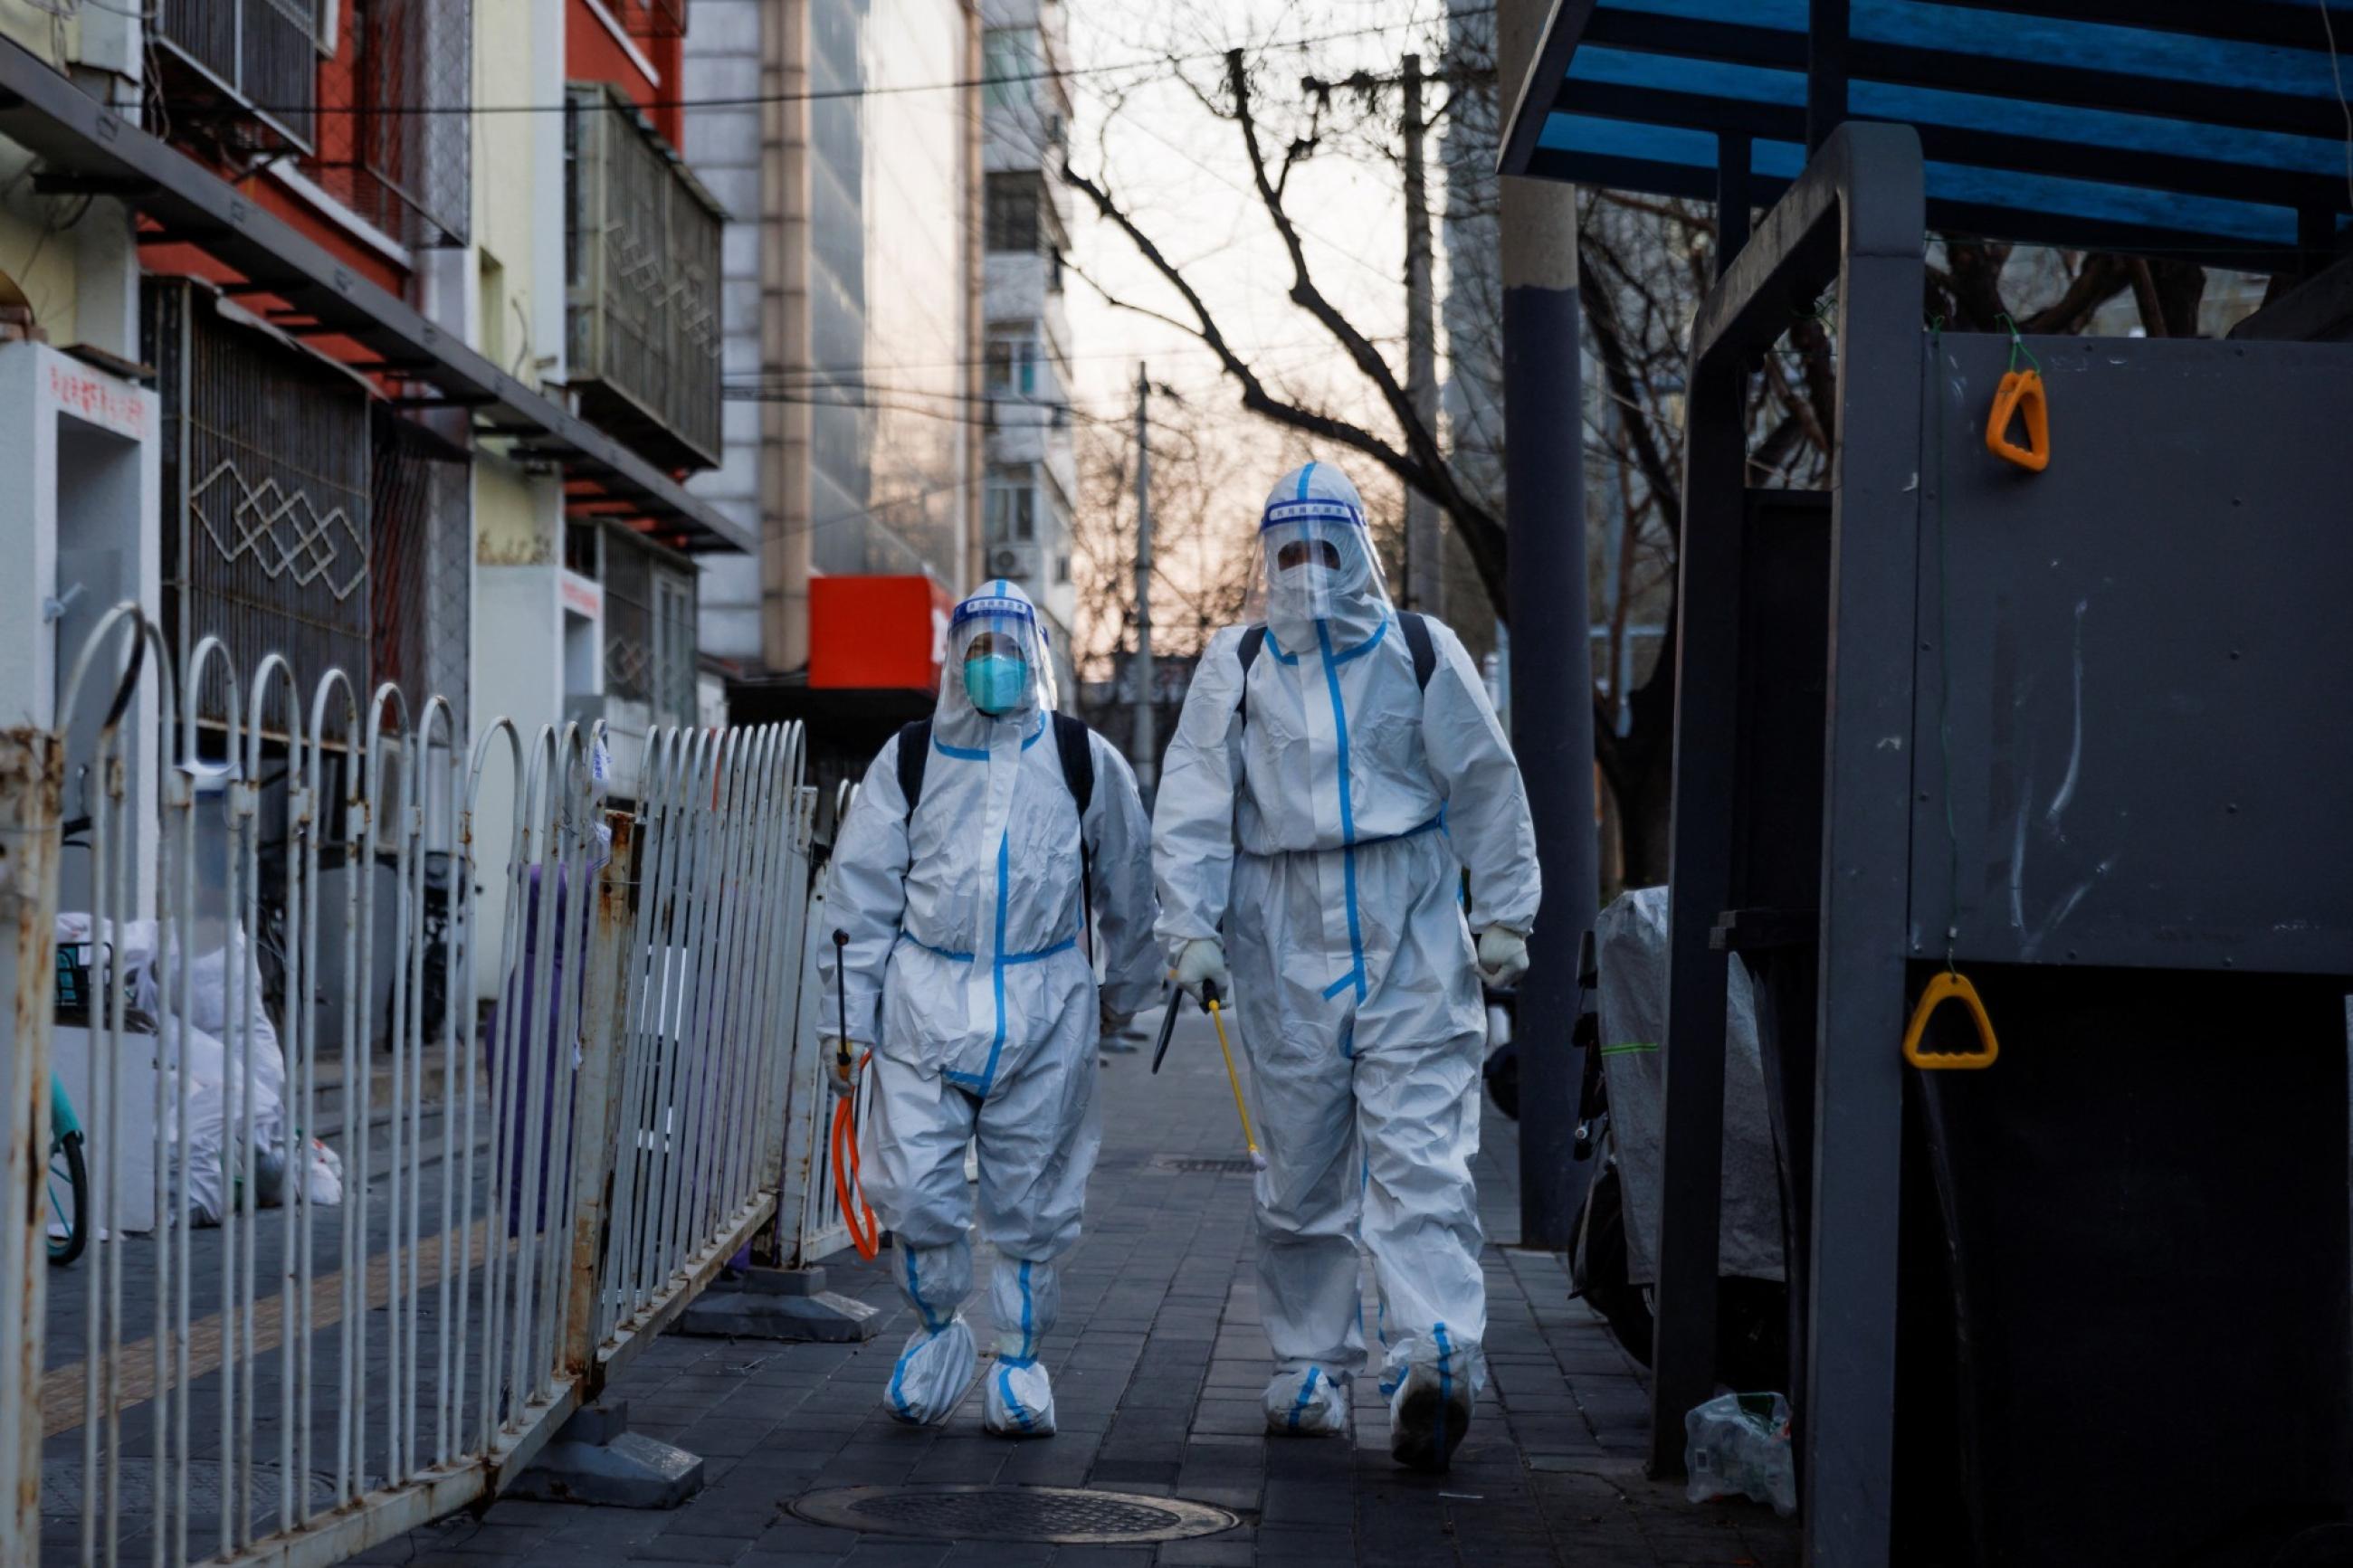 Pandemic prevention workers in protective suits walk in a street as COVID-19 outbreaks continue in Beijing, China, on December 4, 2022.